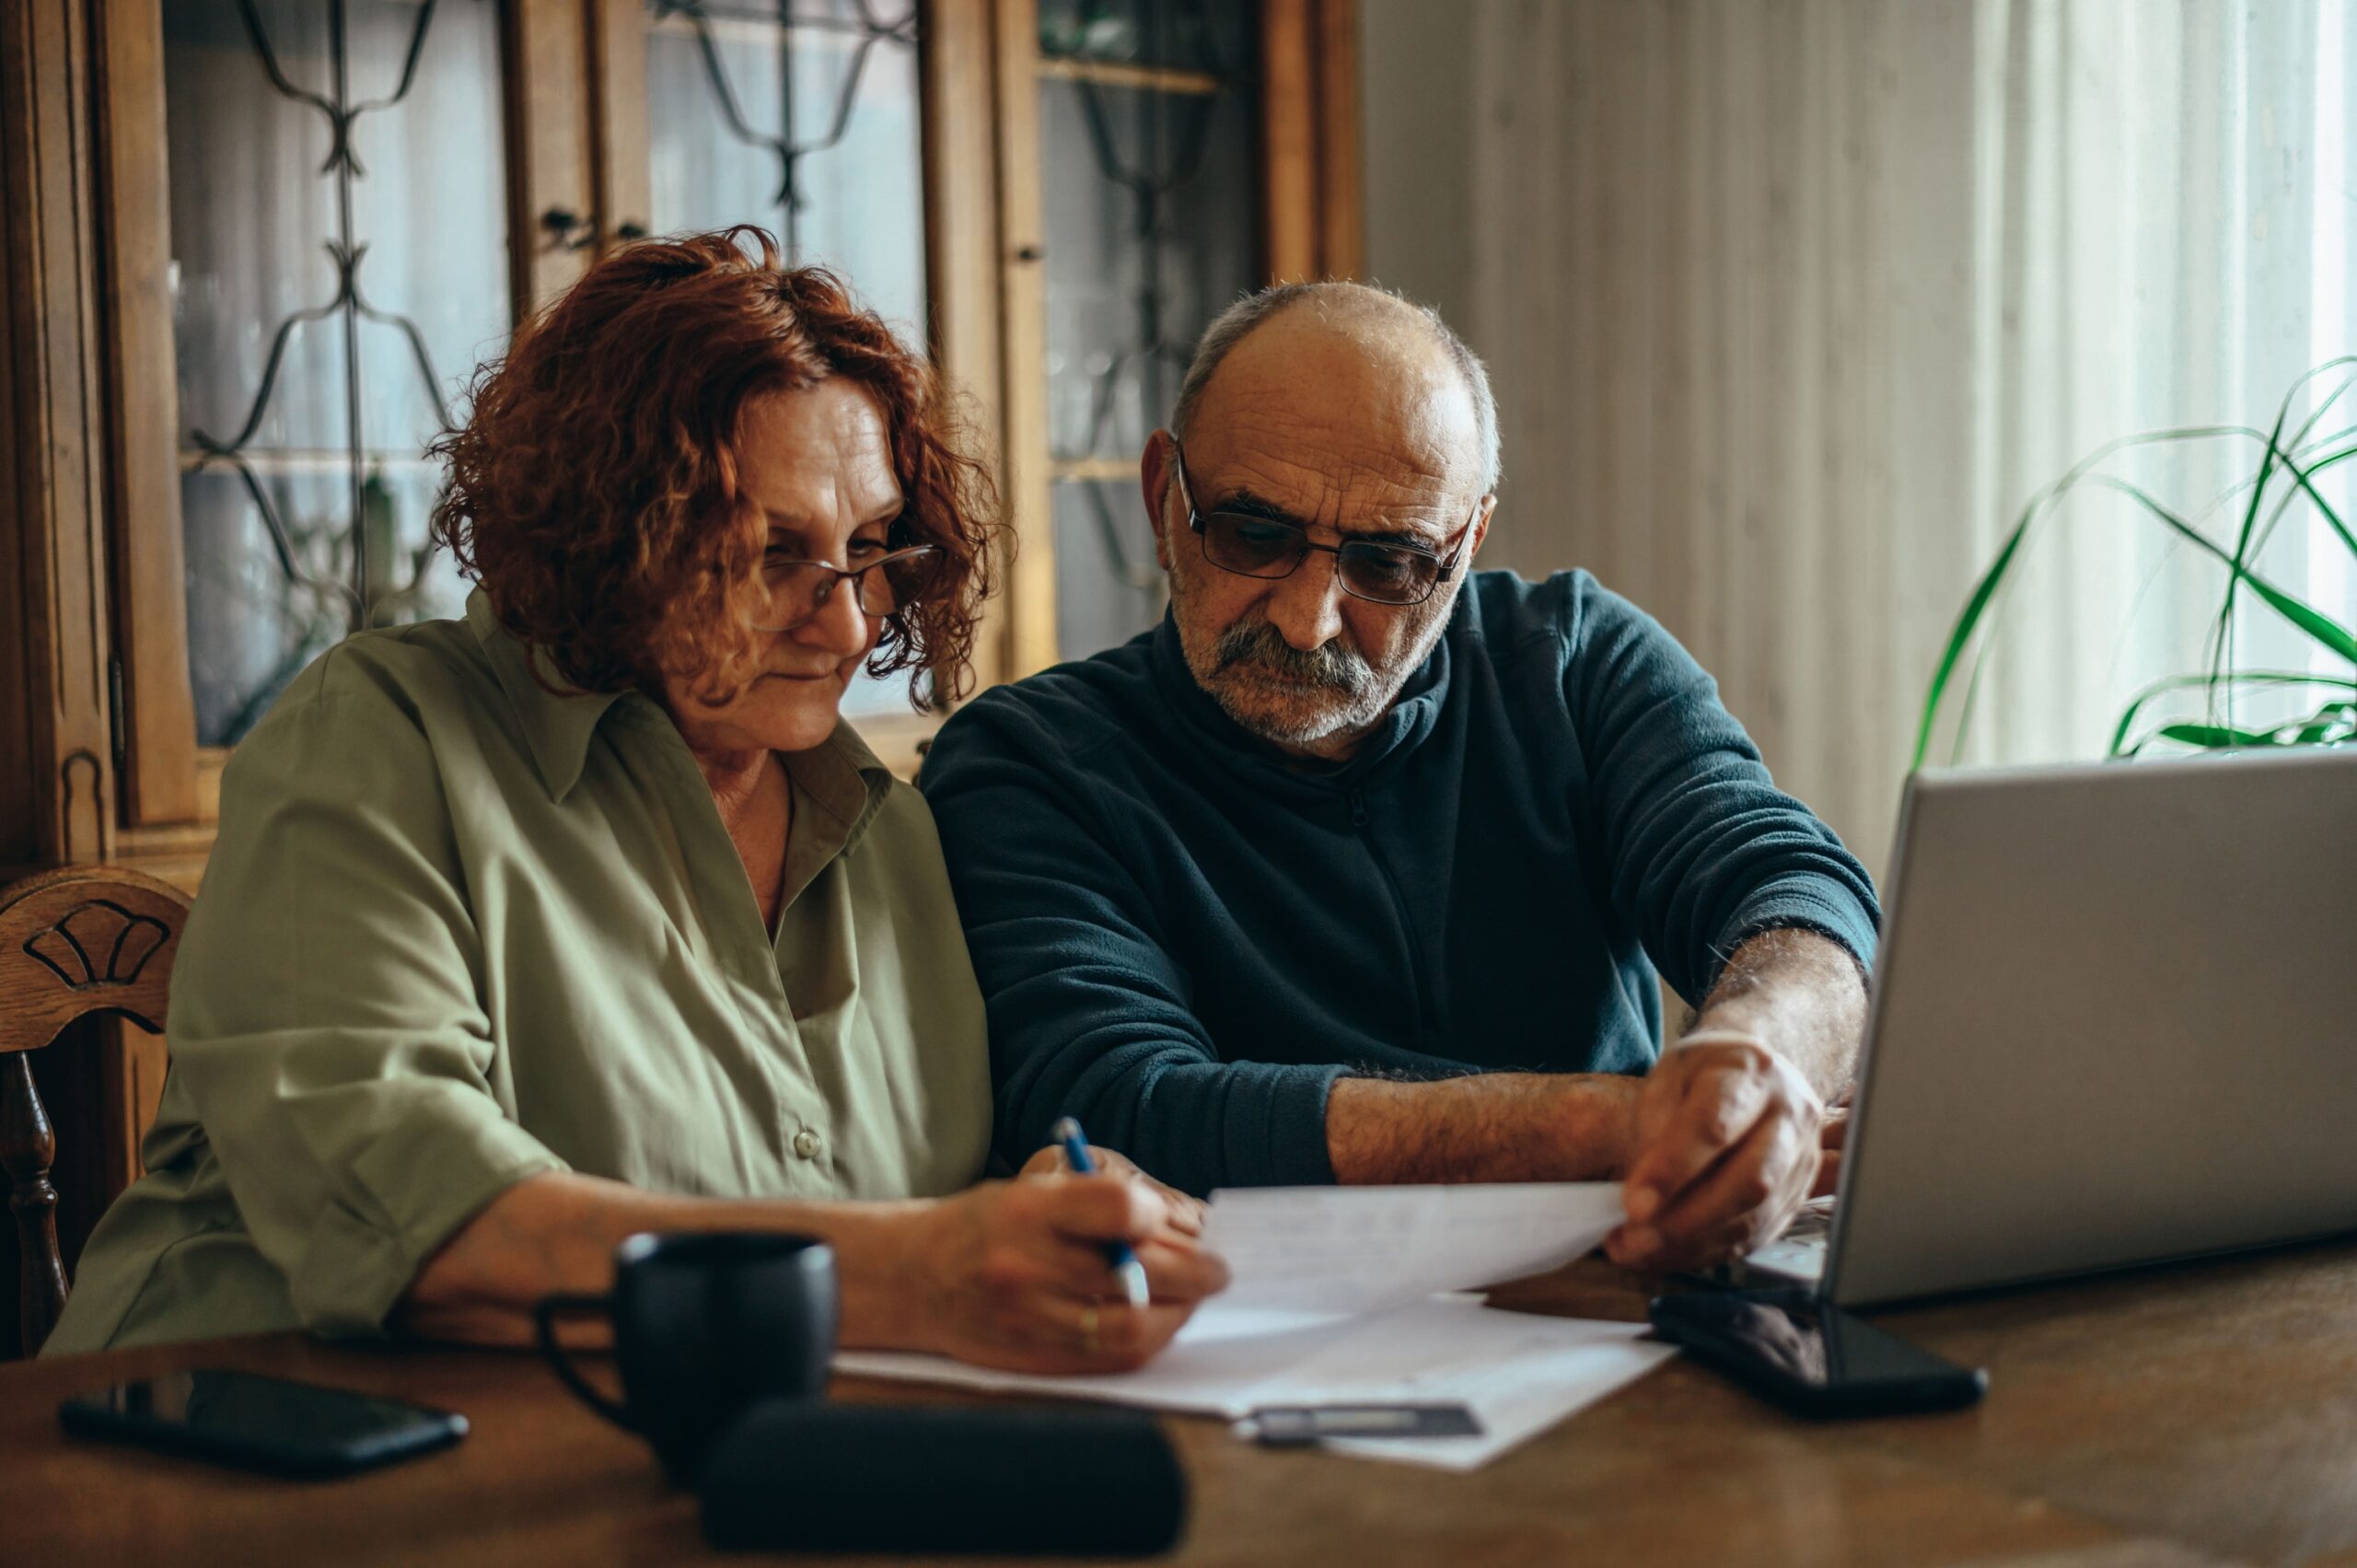 An Elderly couple doing some paperwork together at home.